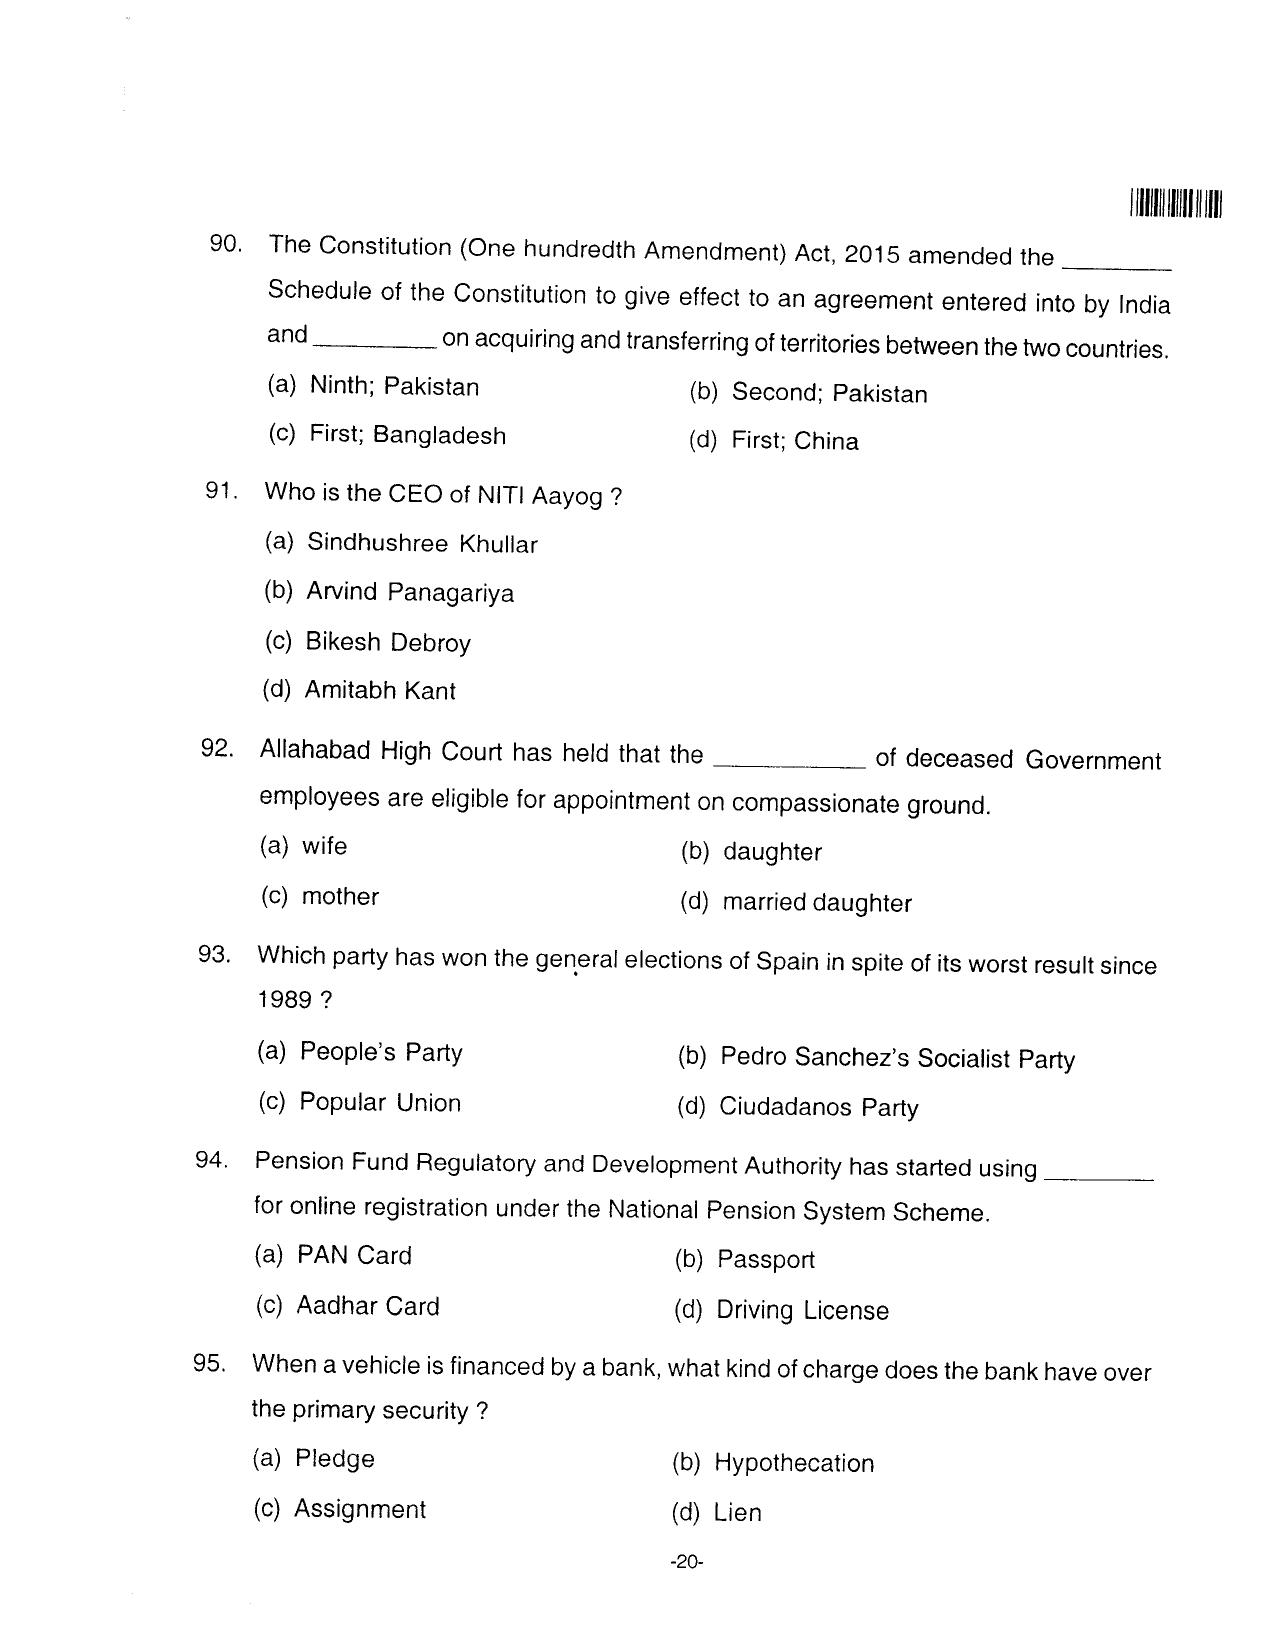 AILET 2016 Question Paper for BA LLB - Page 20